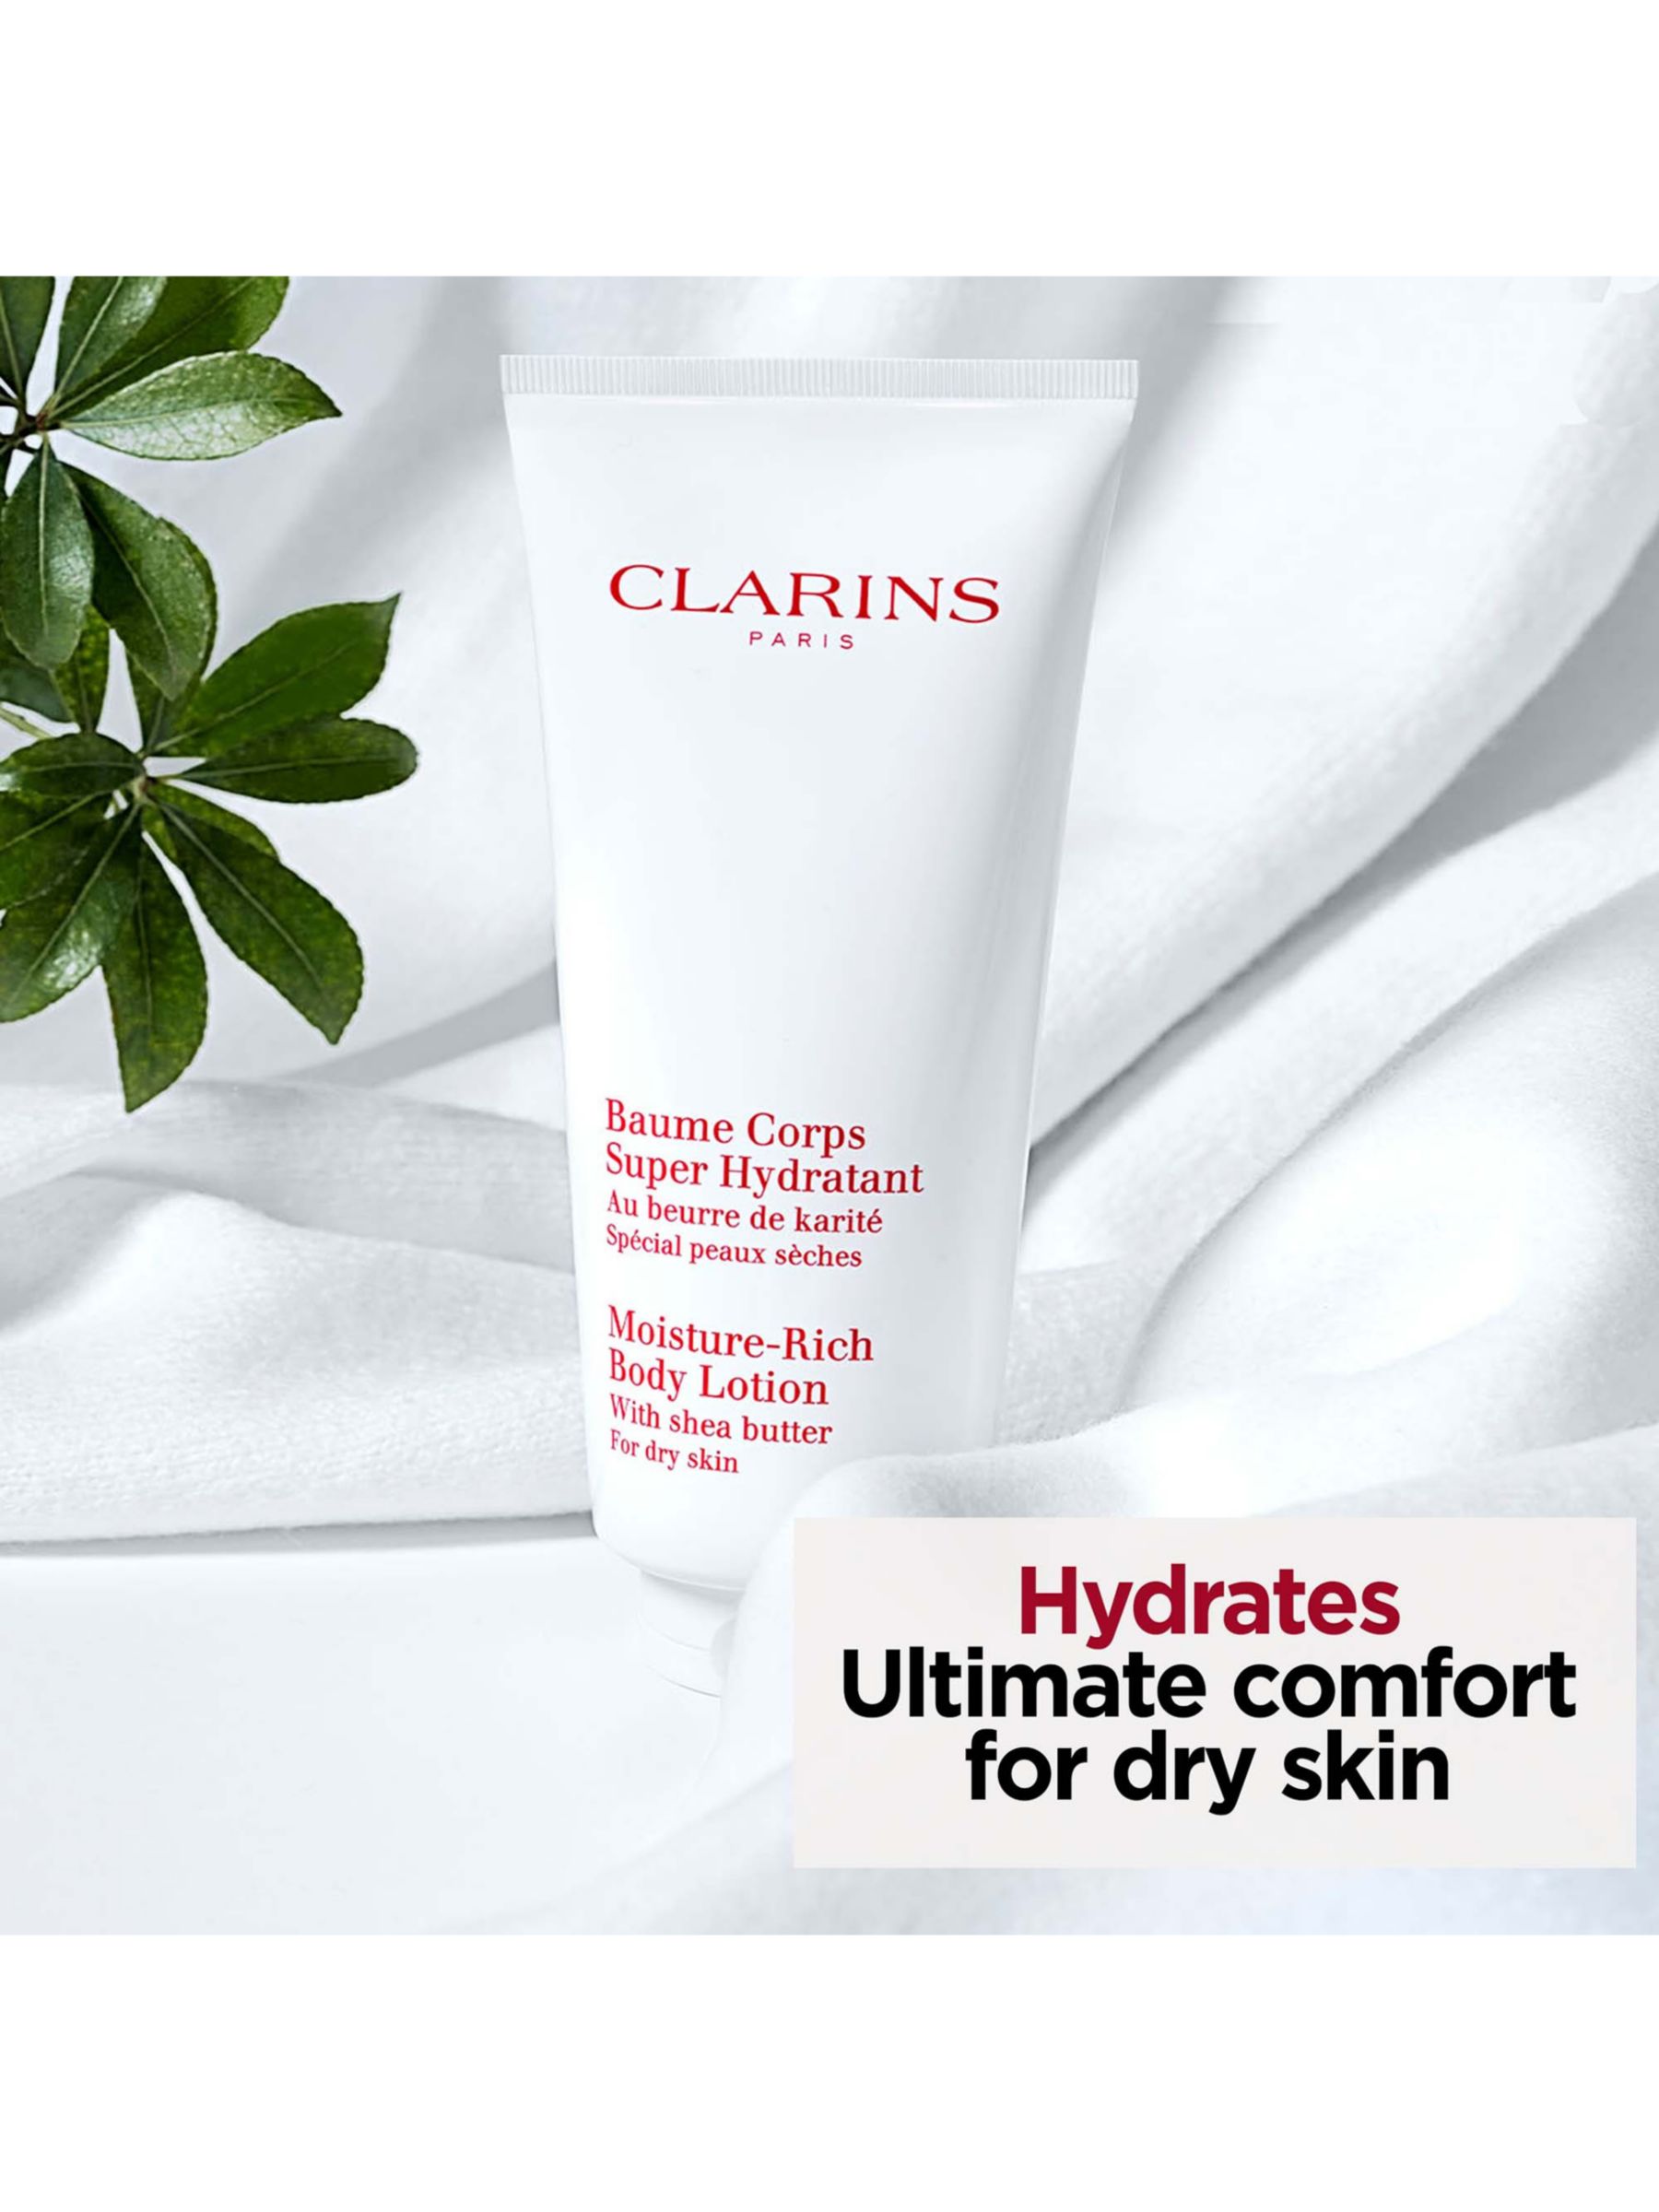 Clarins Moisture Rich Body Lotion, 200ml at John Lewis & Partners